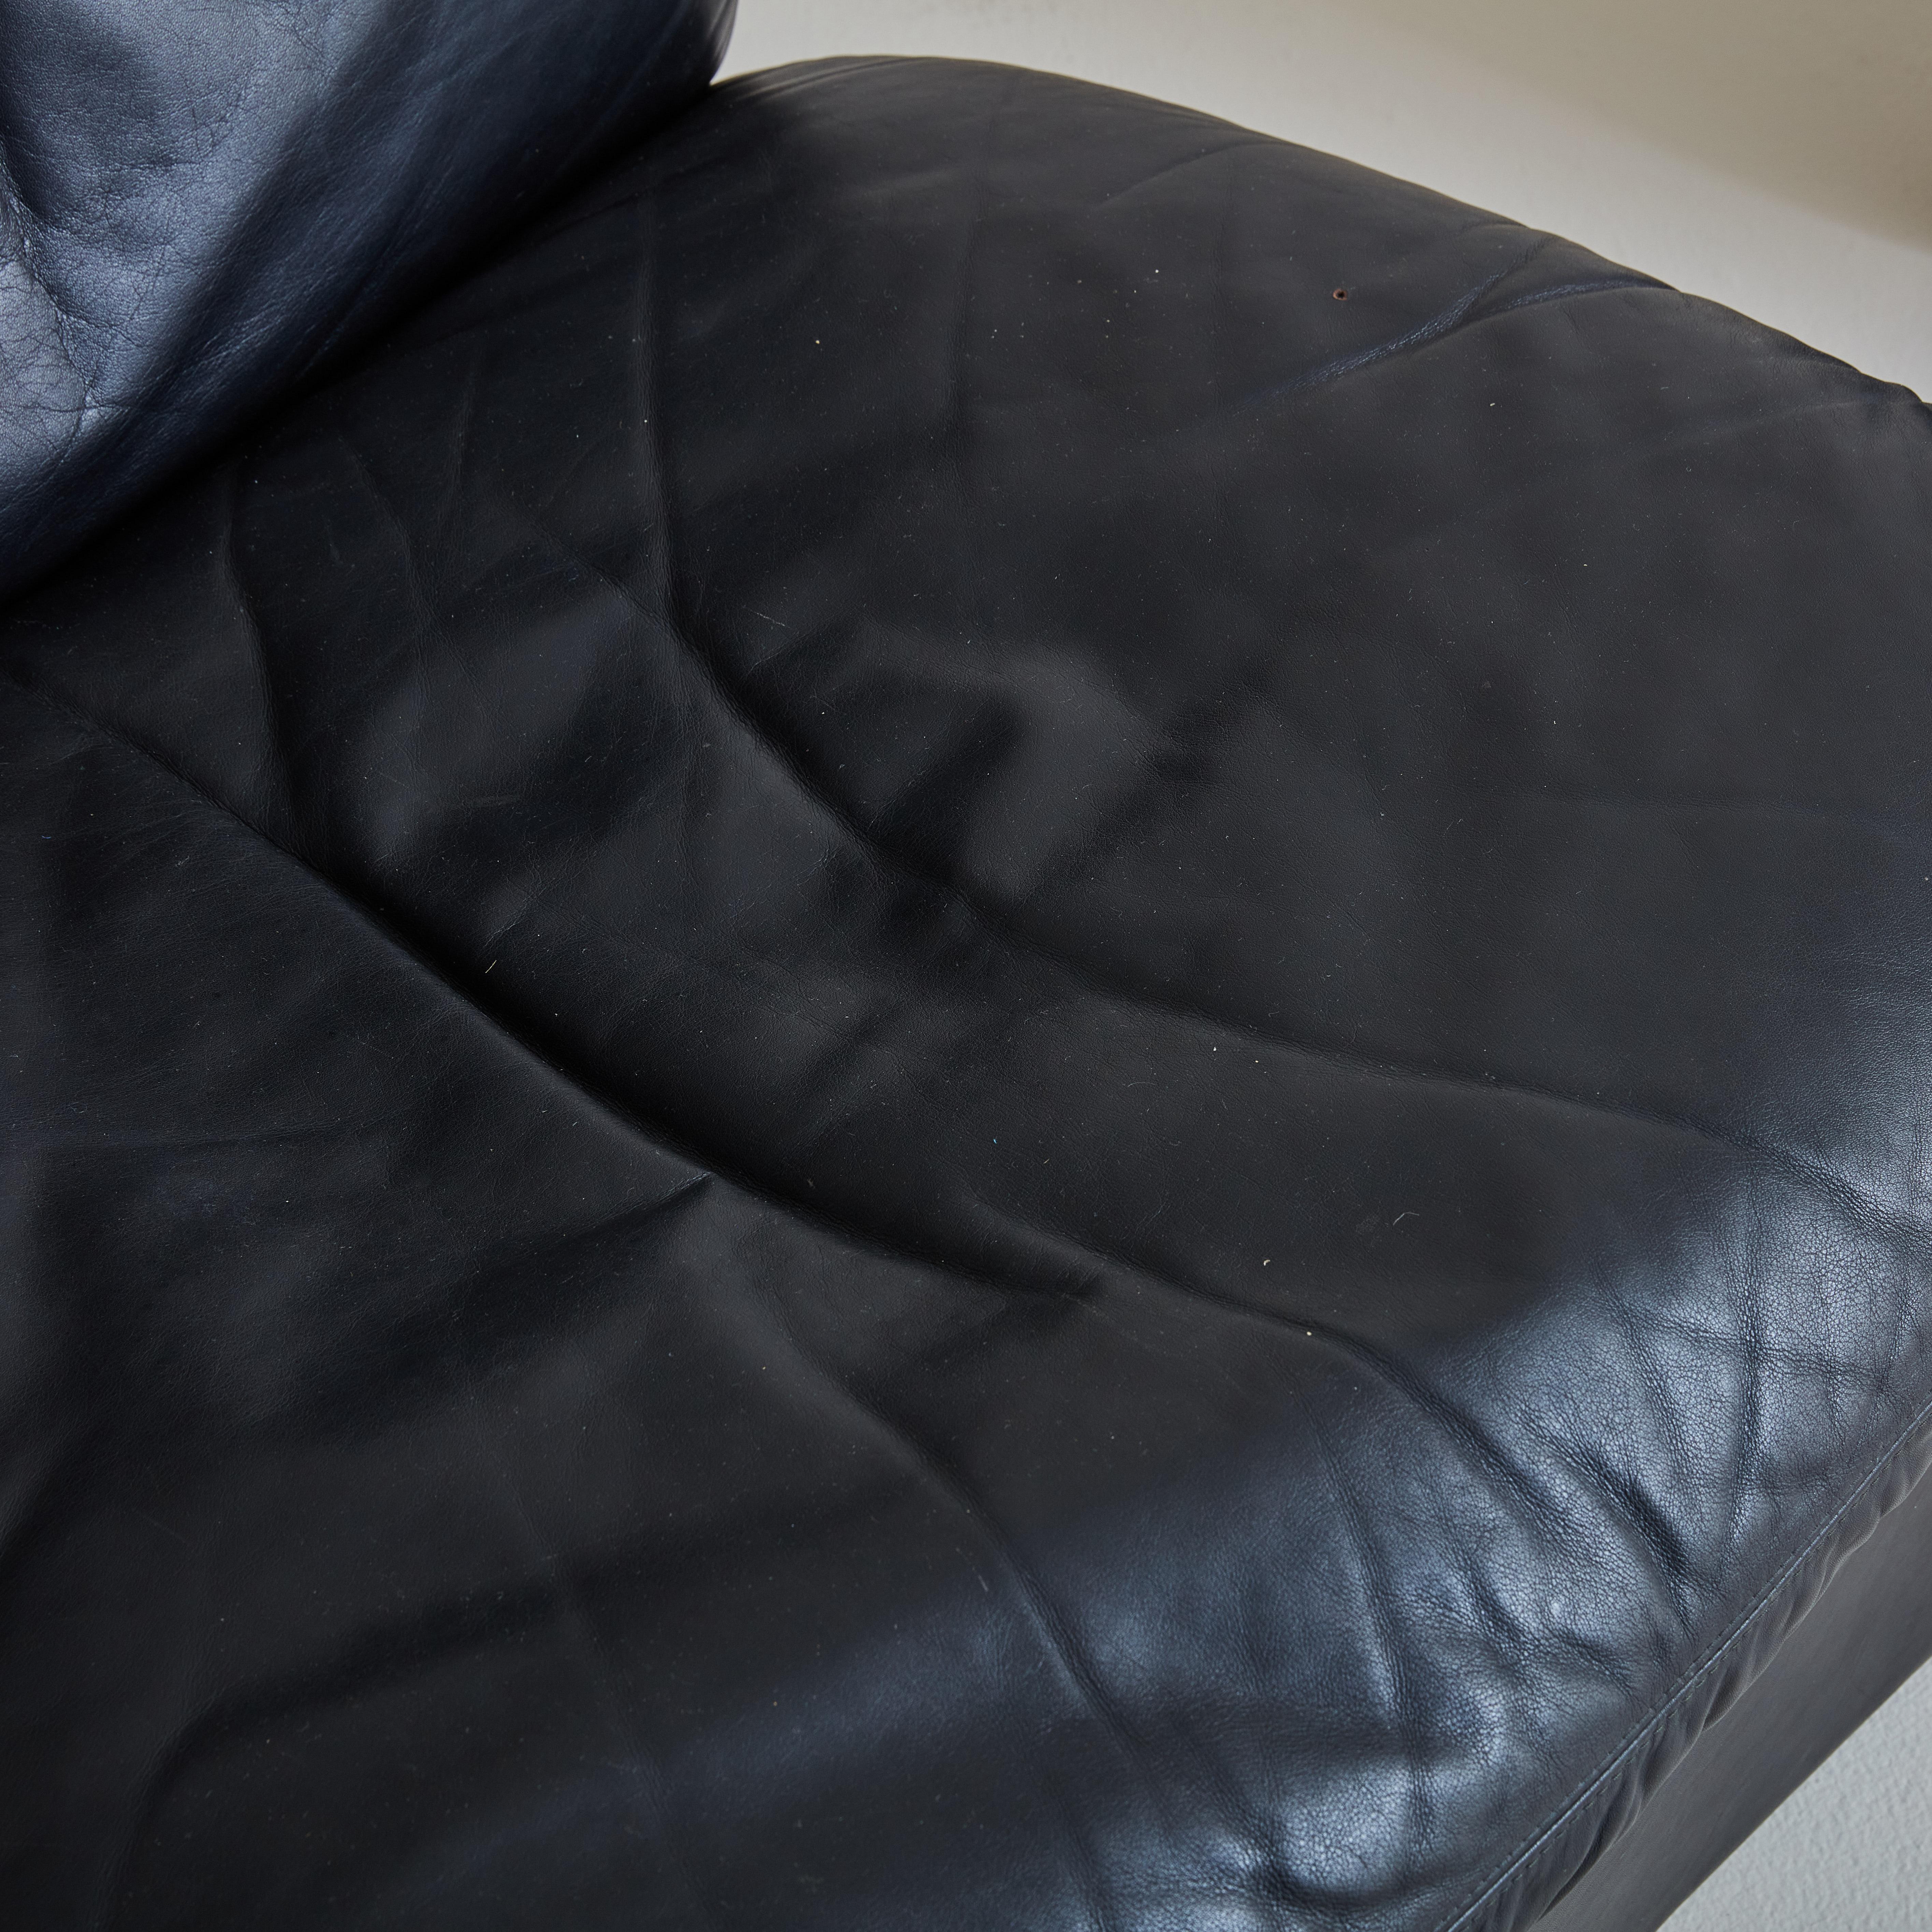 Late 20th Century Curved Lounge Chair in Original Black Leather by B&T Salotti, Italy 1990s